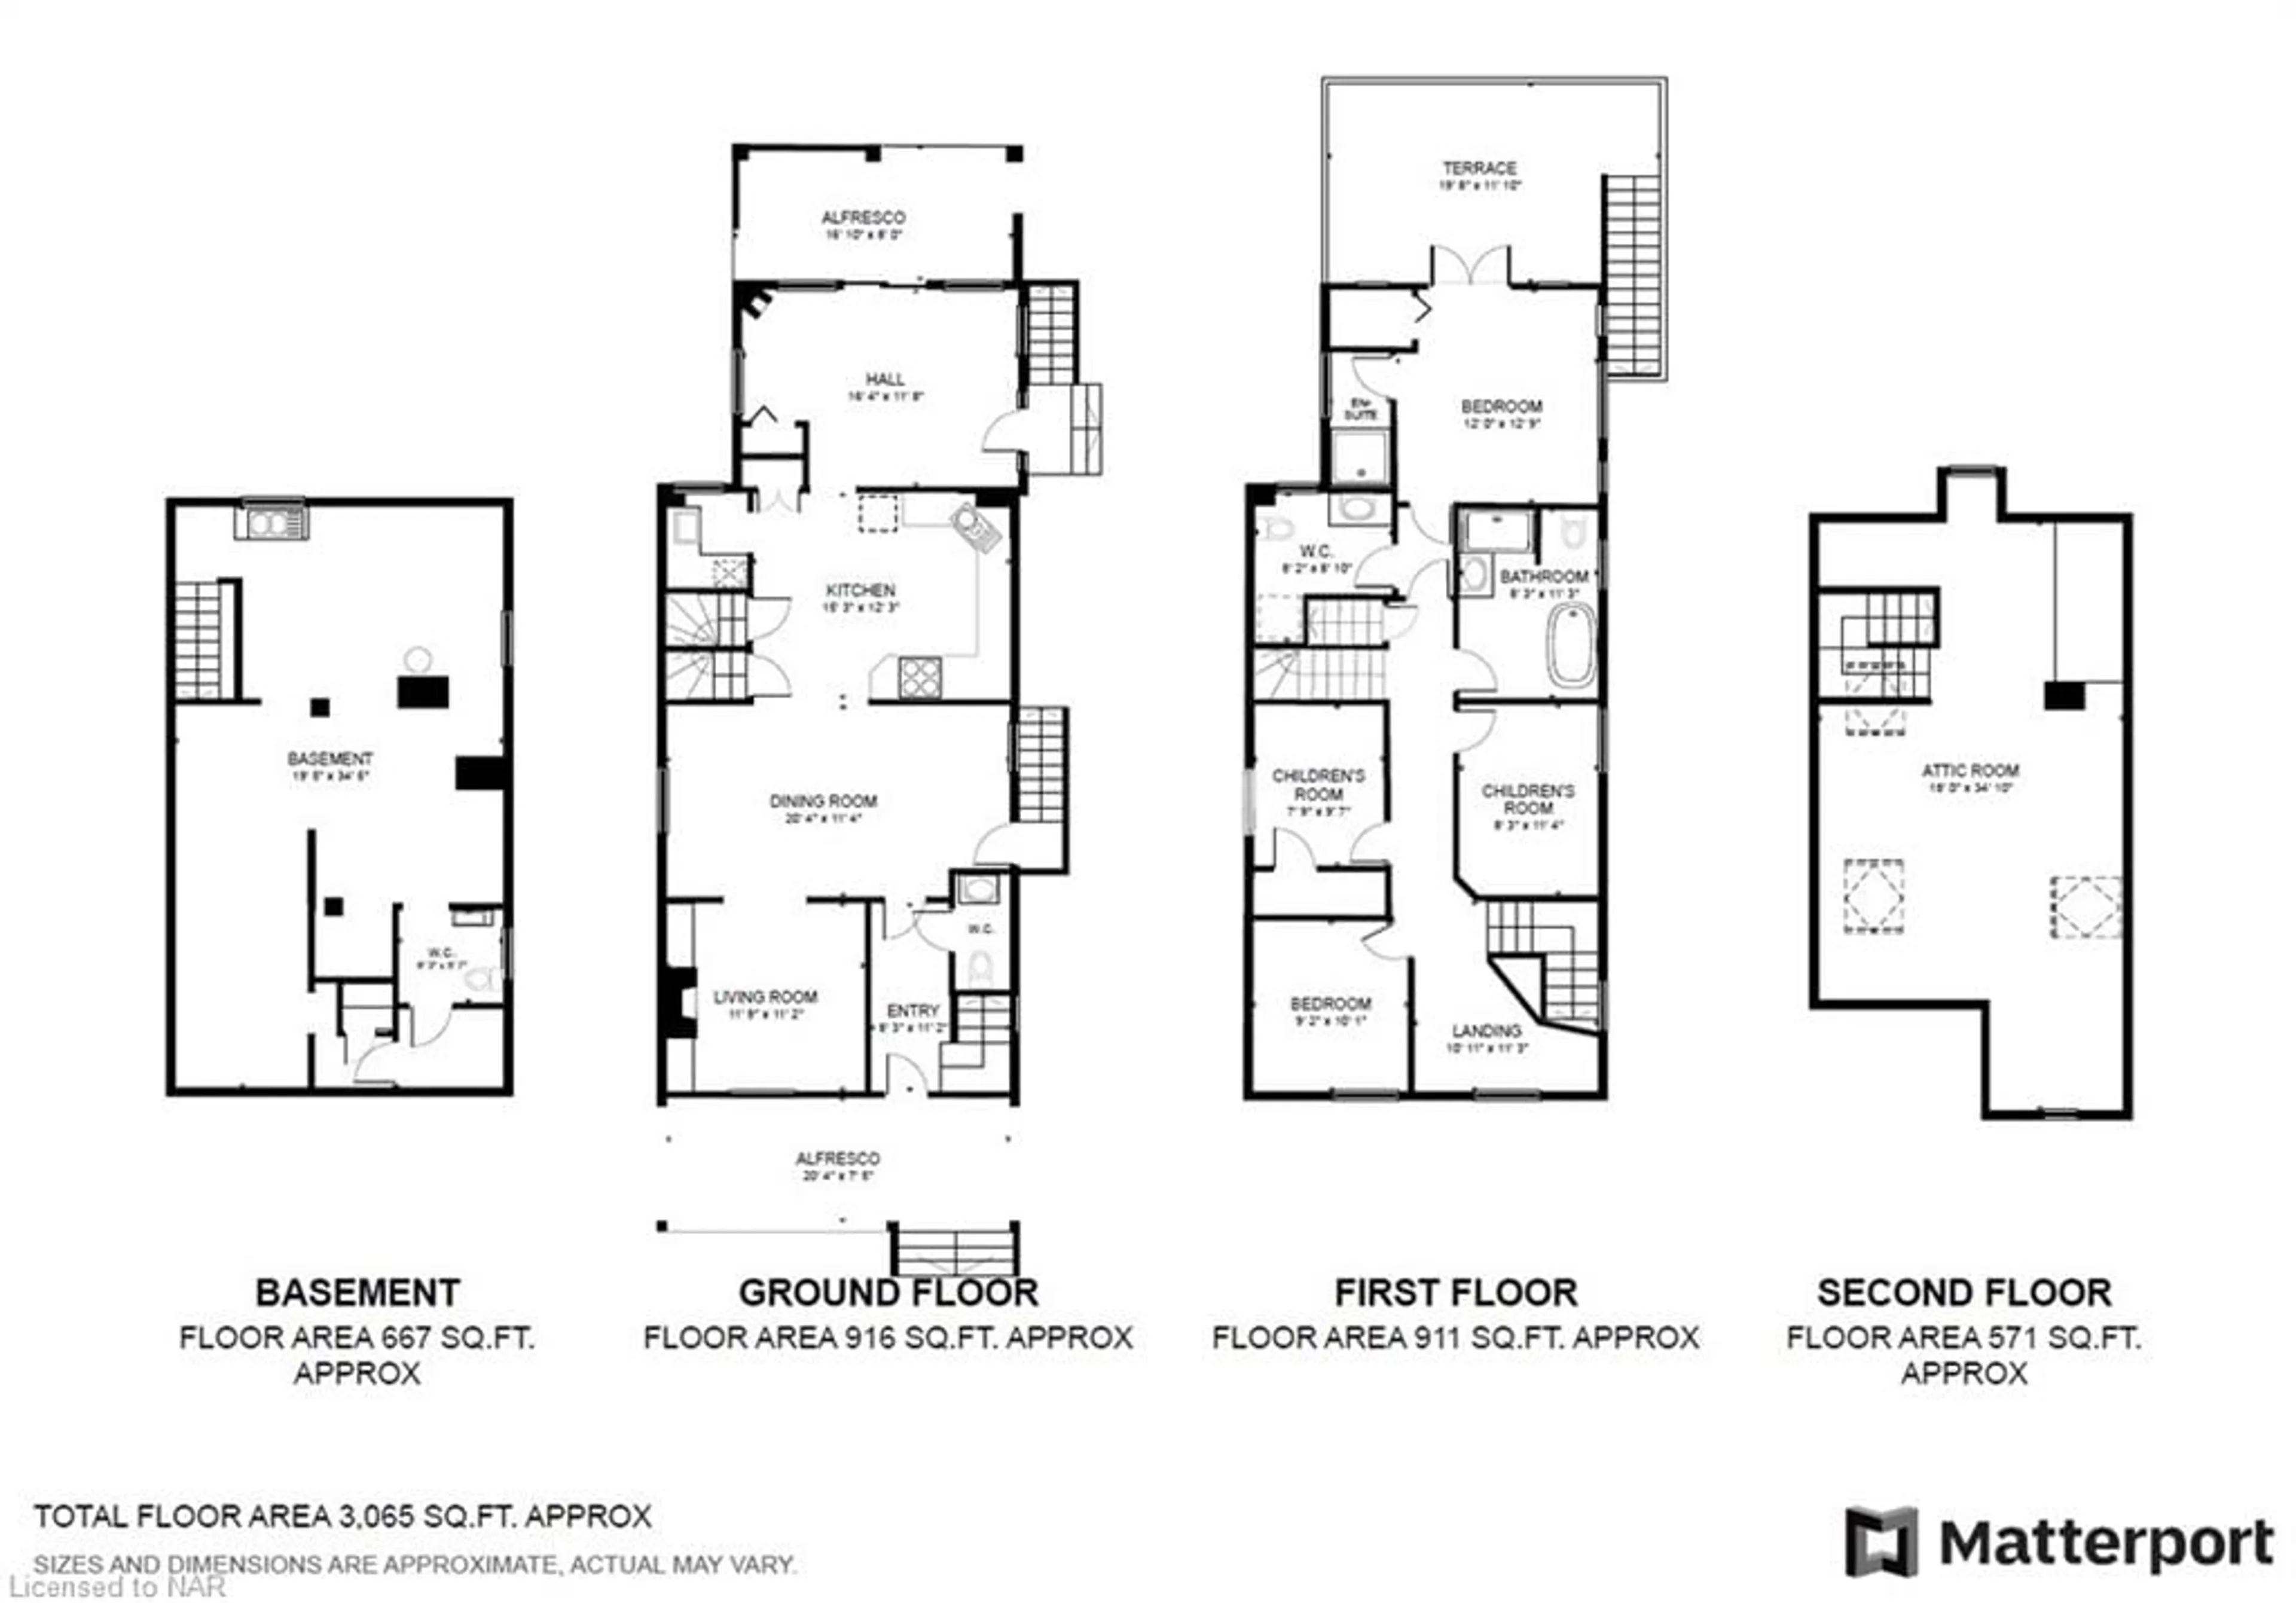 Floor plan for 38 Maple St, St. Catharines Ontario L2R 2A9